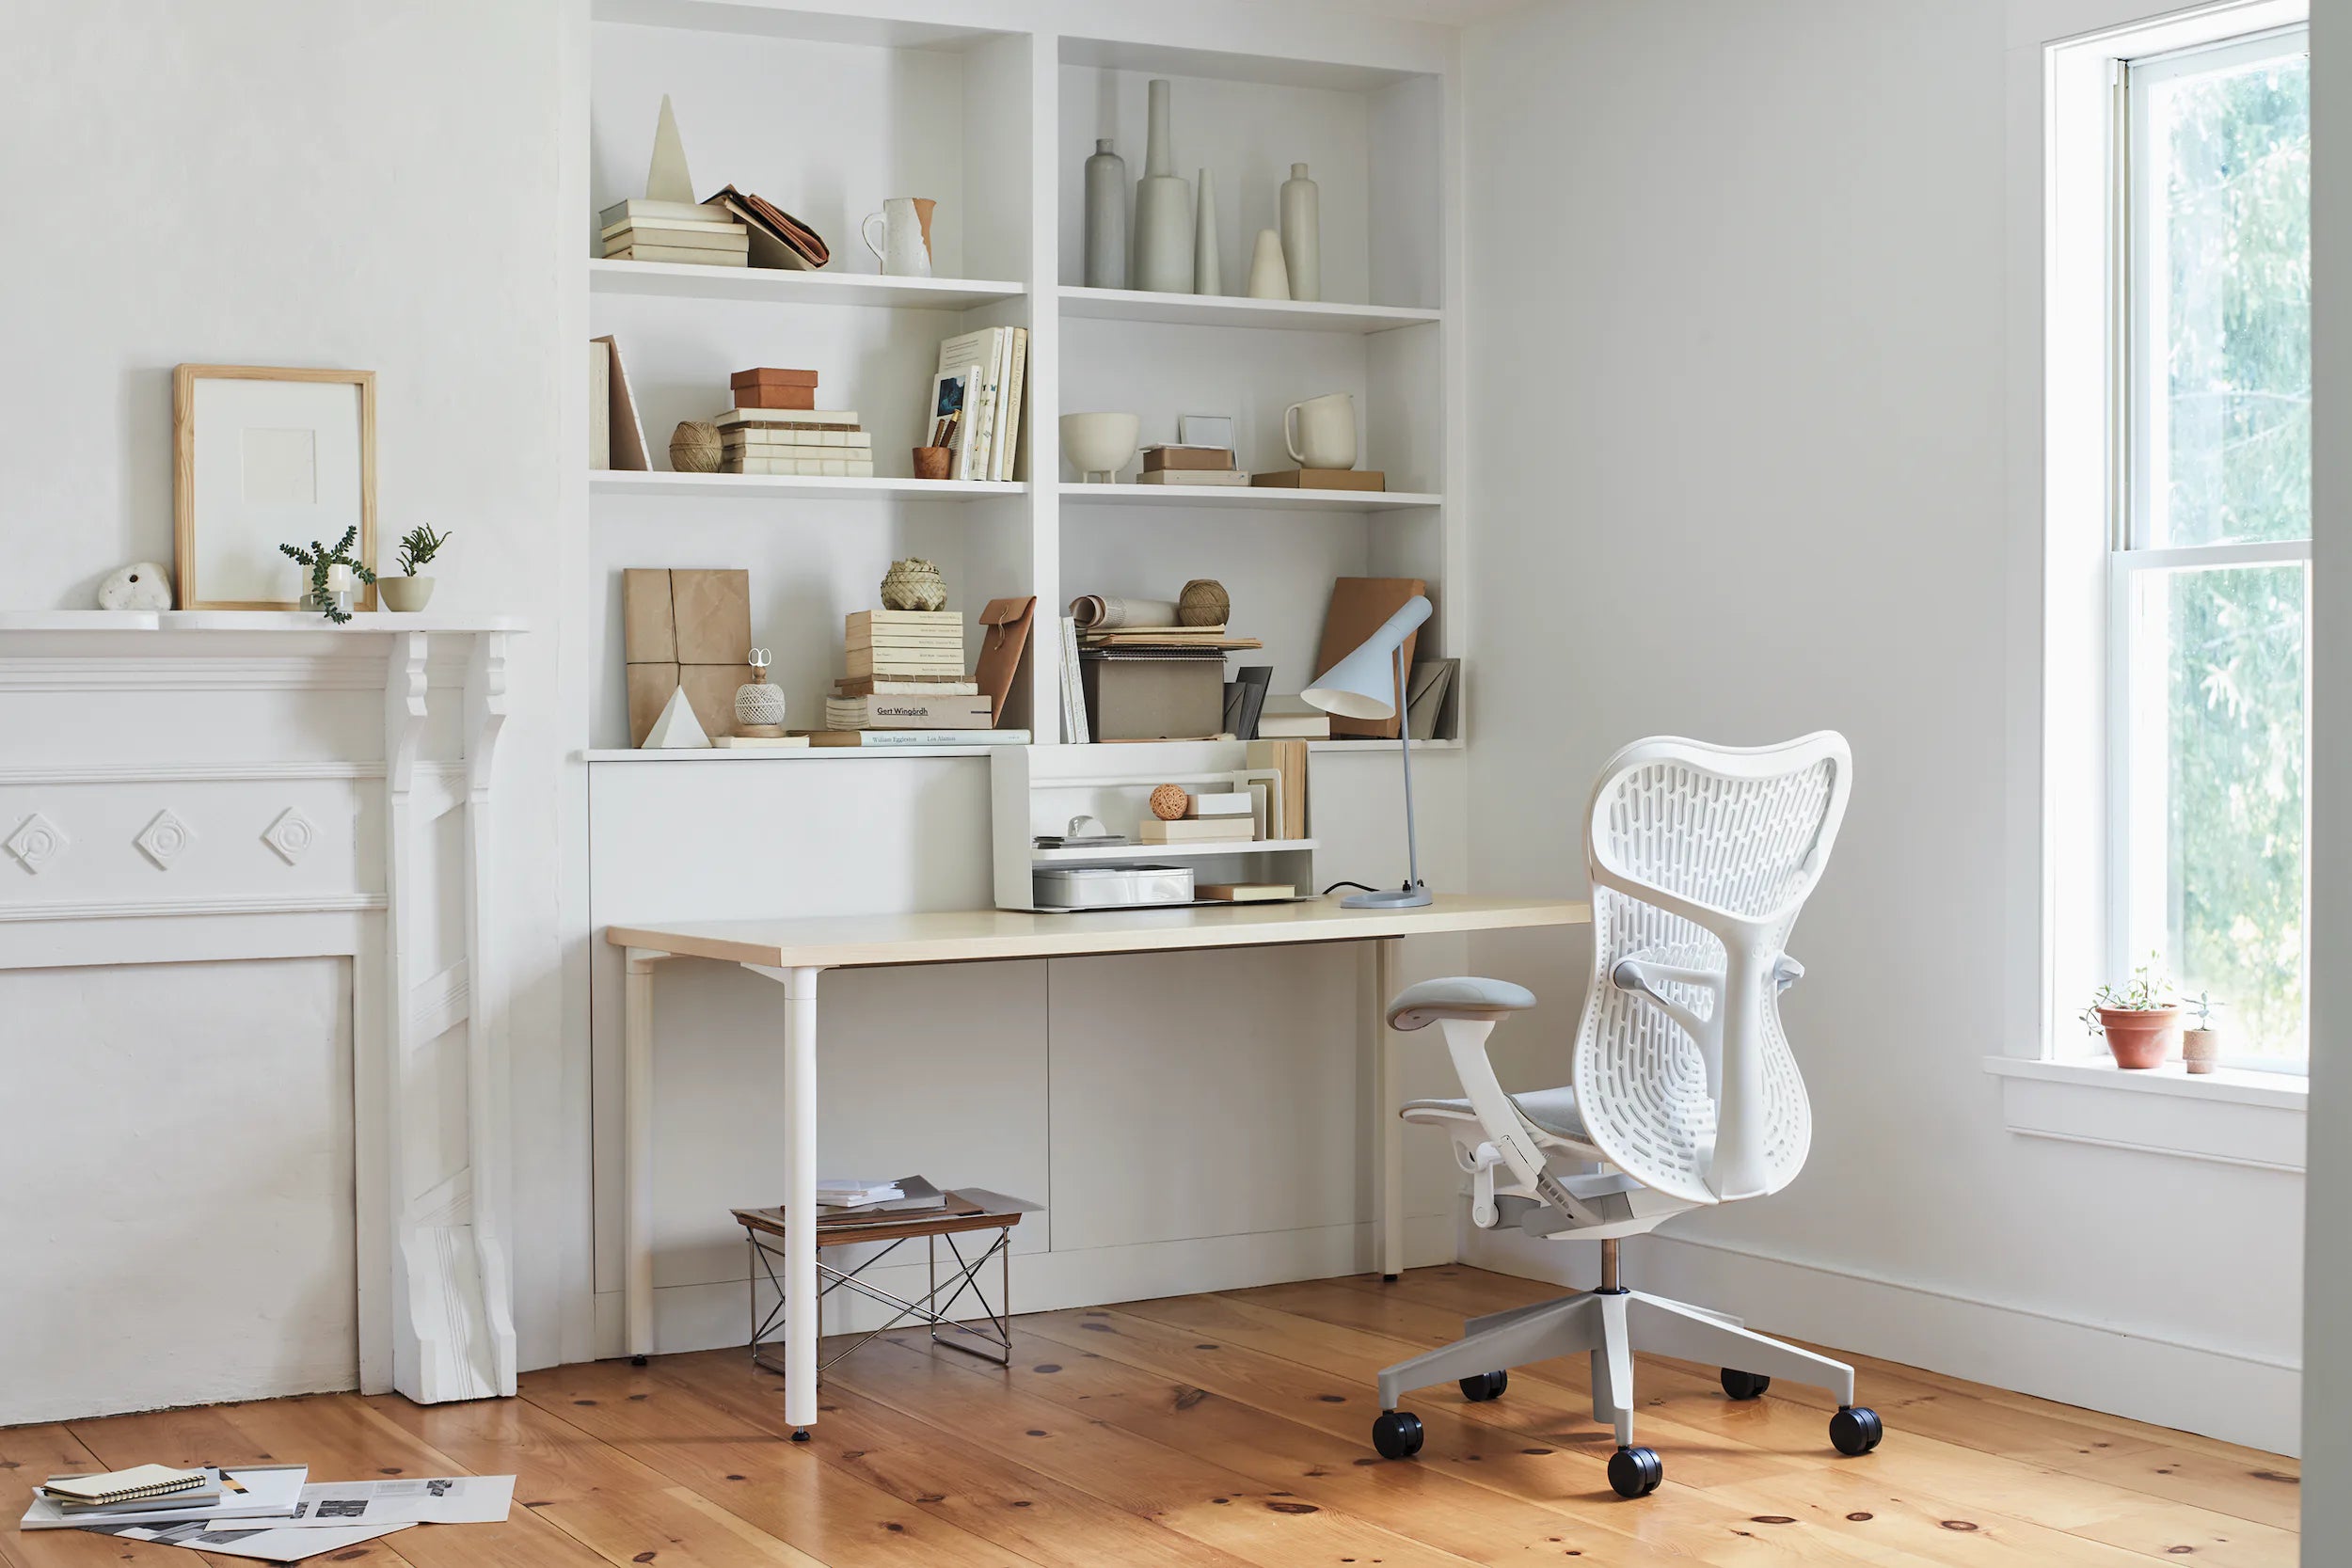 An AbakEnvironments Desk with a walnut top and polished legs, with a graphite Aeron Chair in a light home office setting and Folk Ladder Shelving.